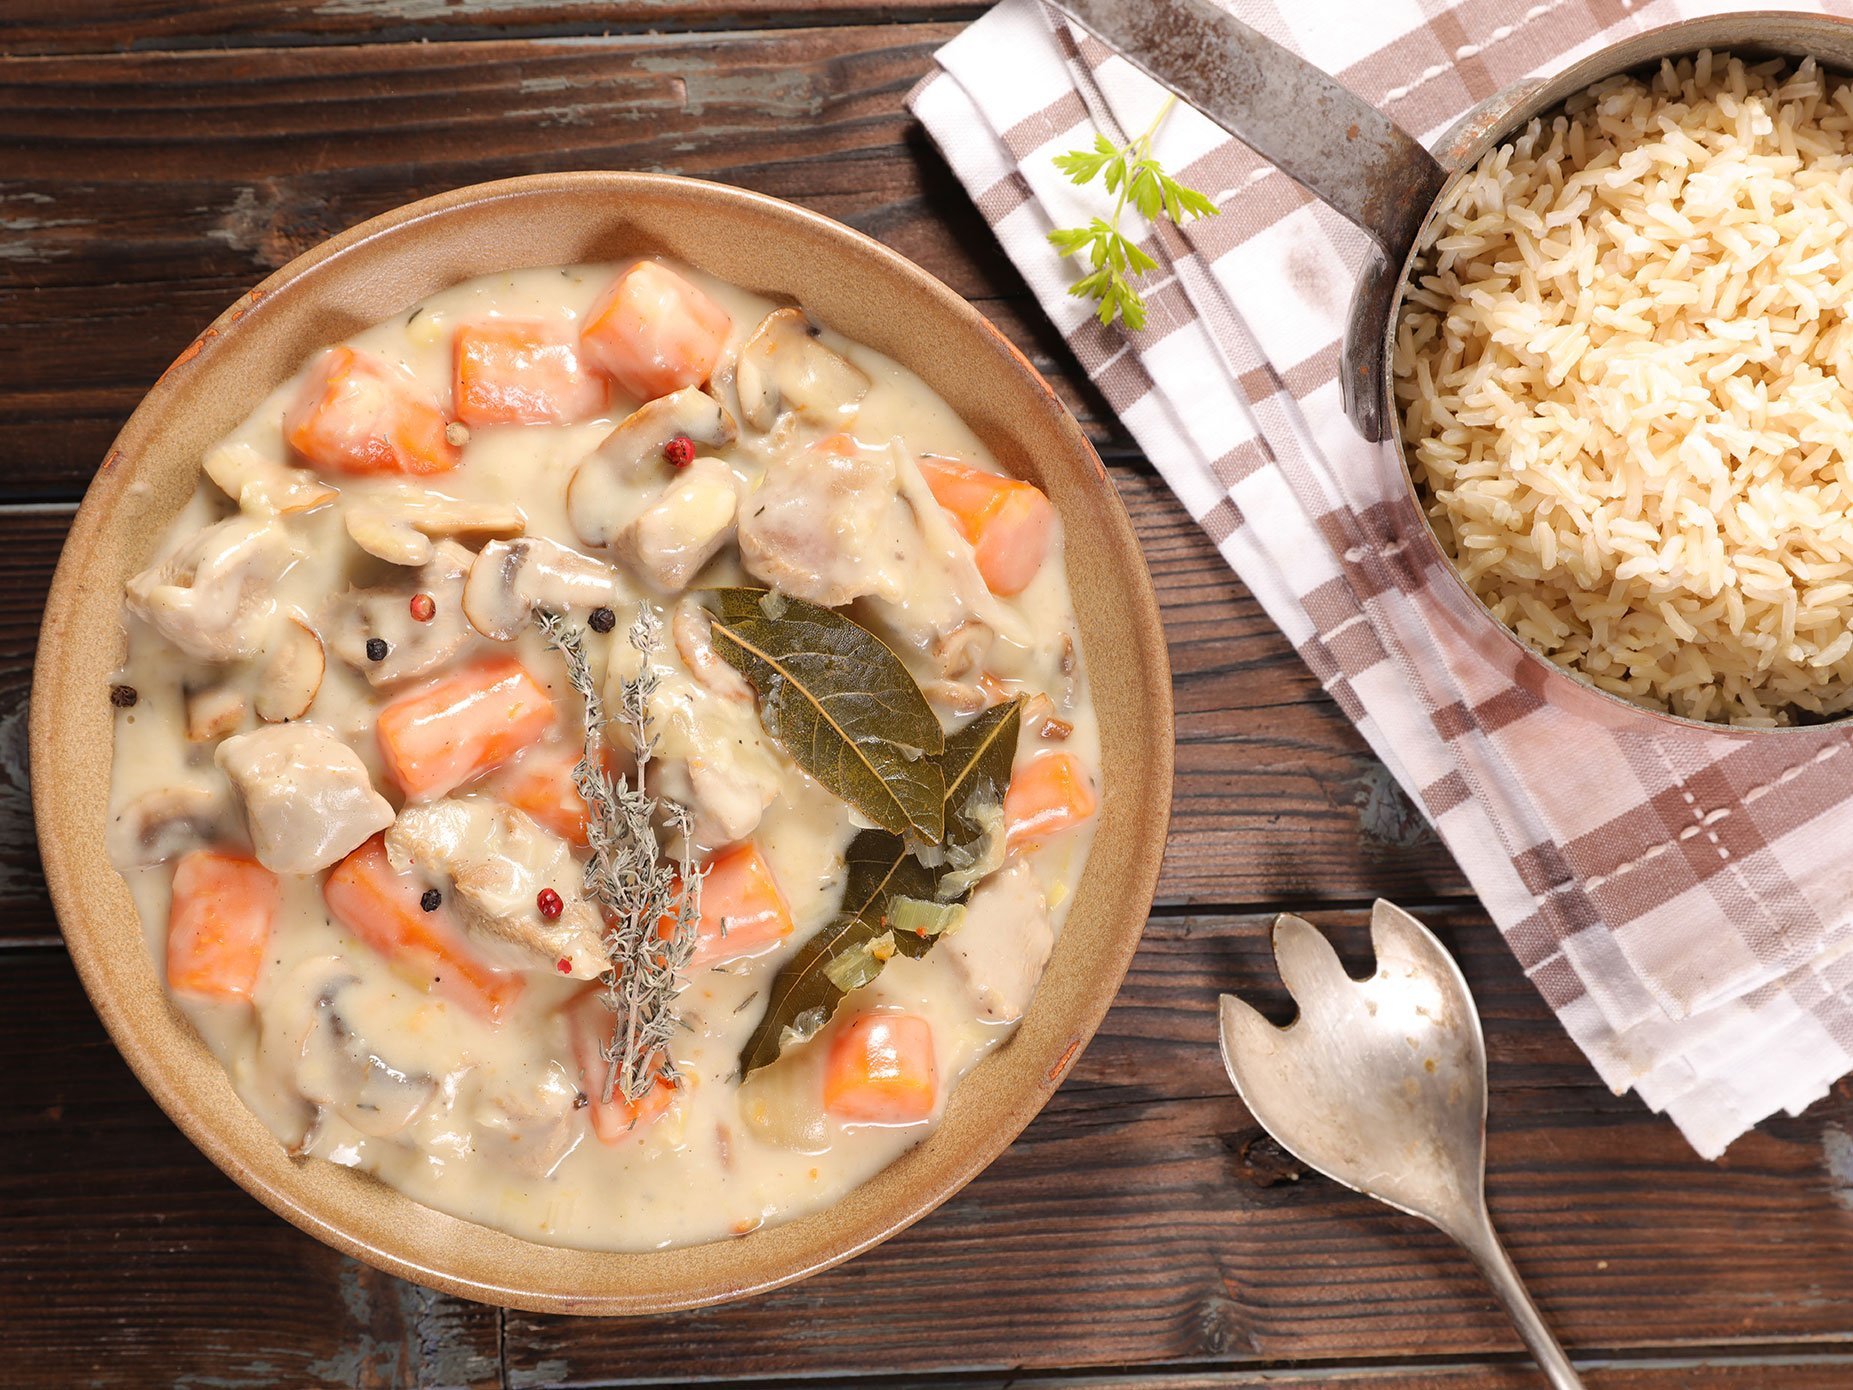 Blanquette De Veau, Veal Cooked With Cream And Carrot